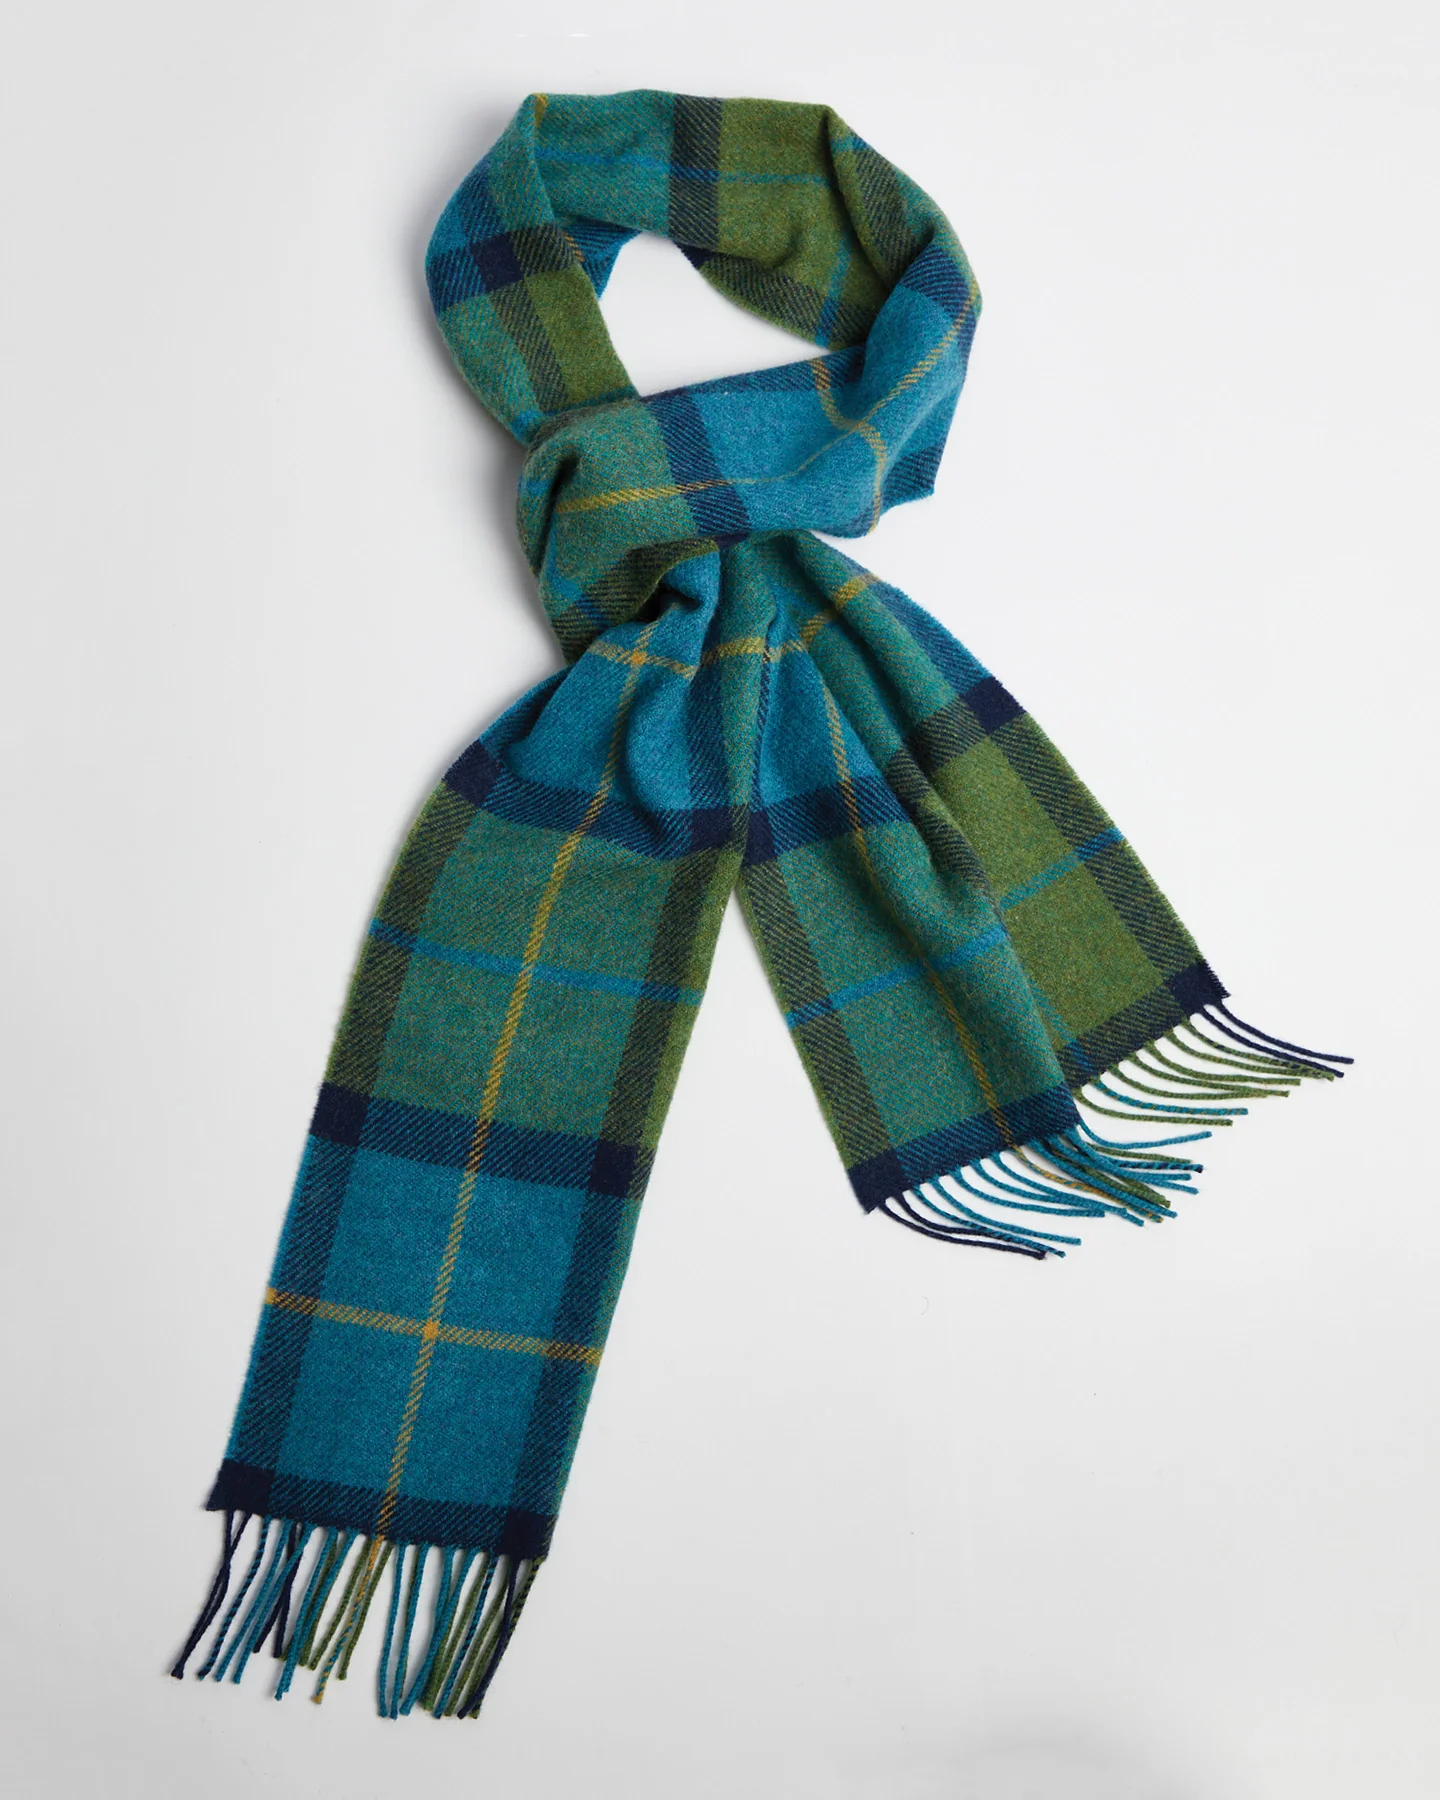 Foxford, Blue & Green Check lambswool Scarf